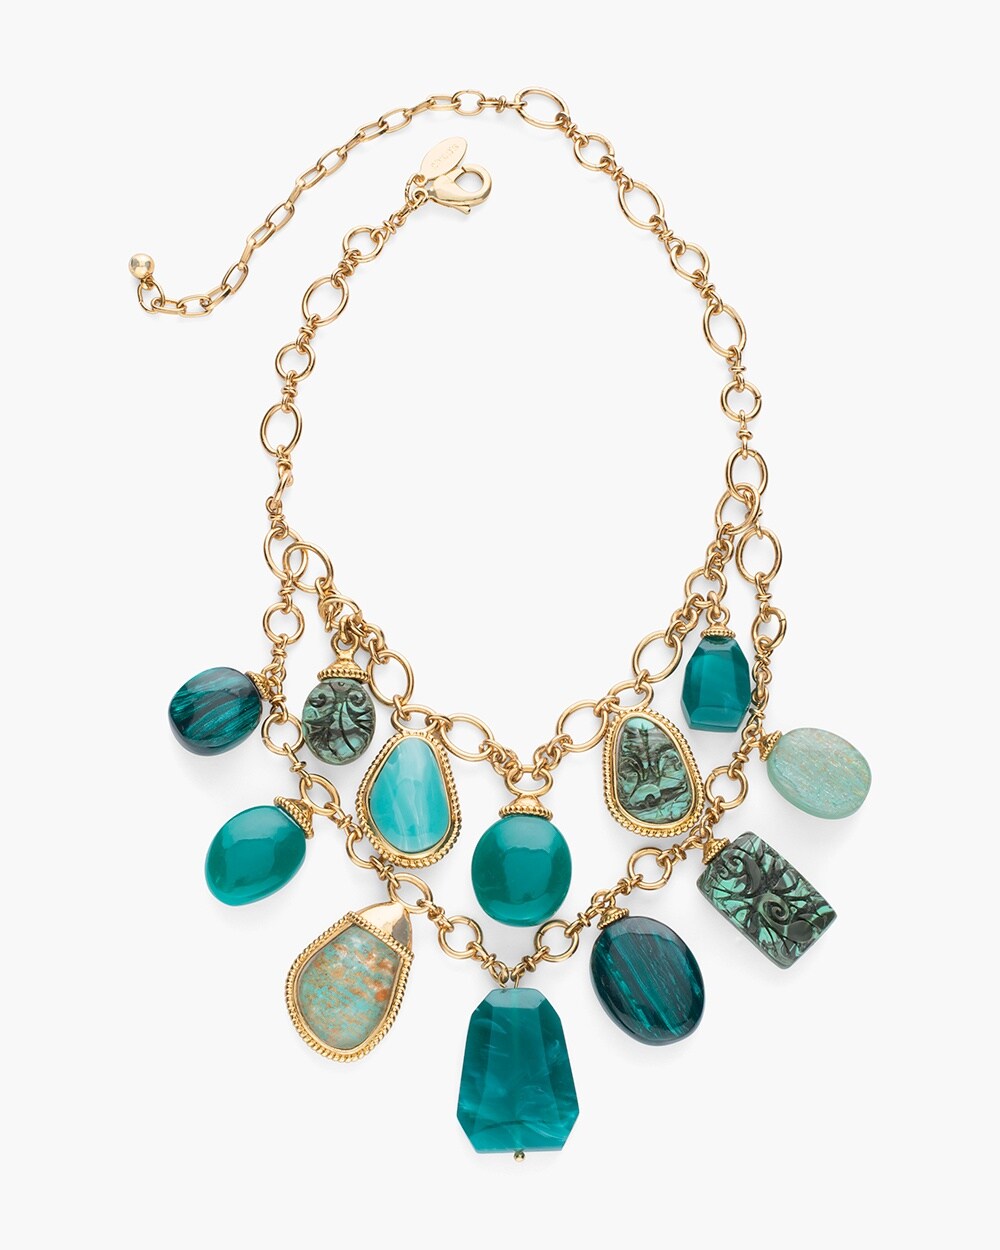 Teal Double-Strand Bib Necklace